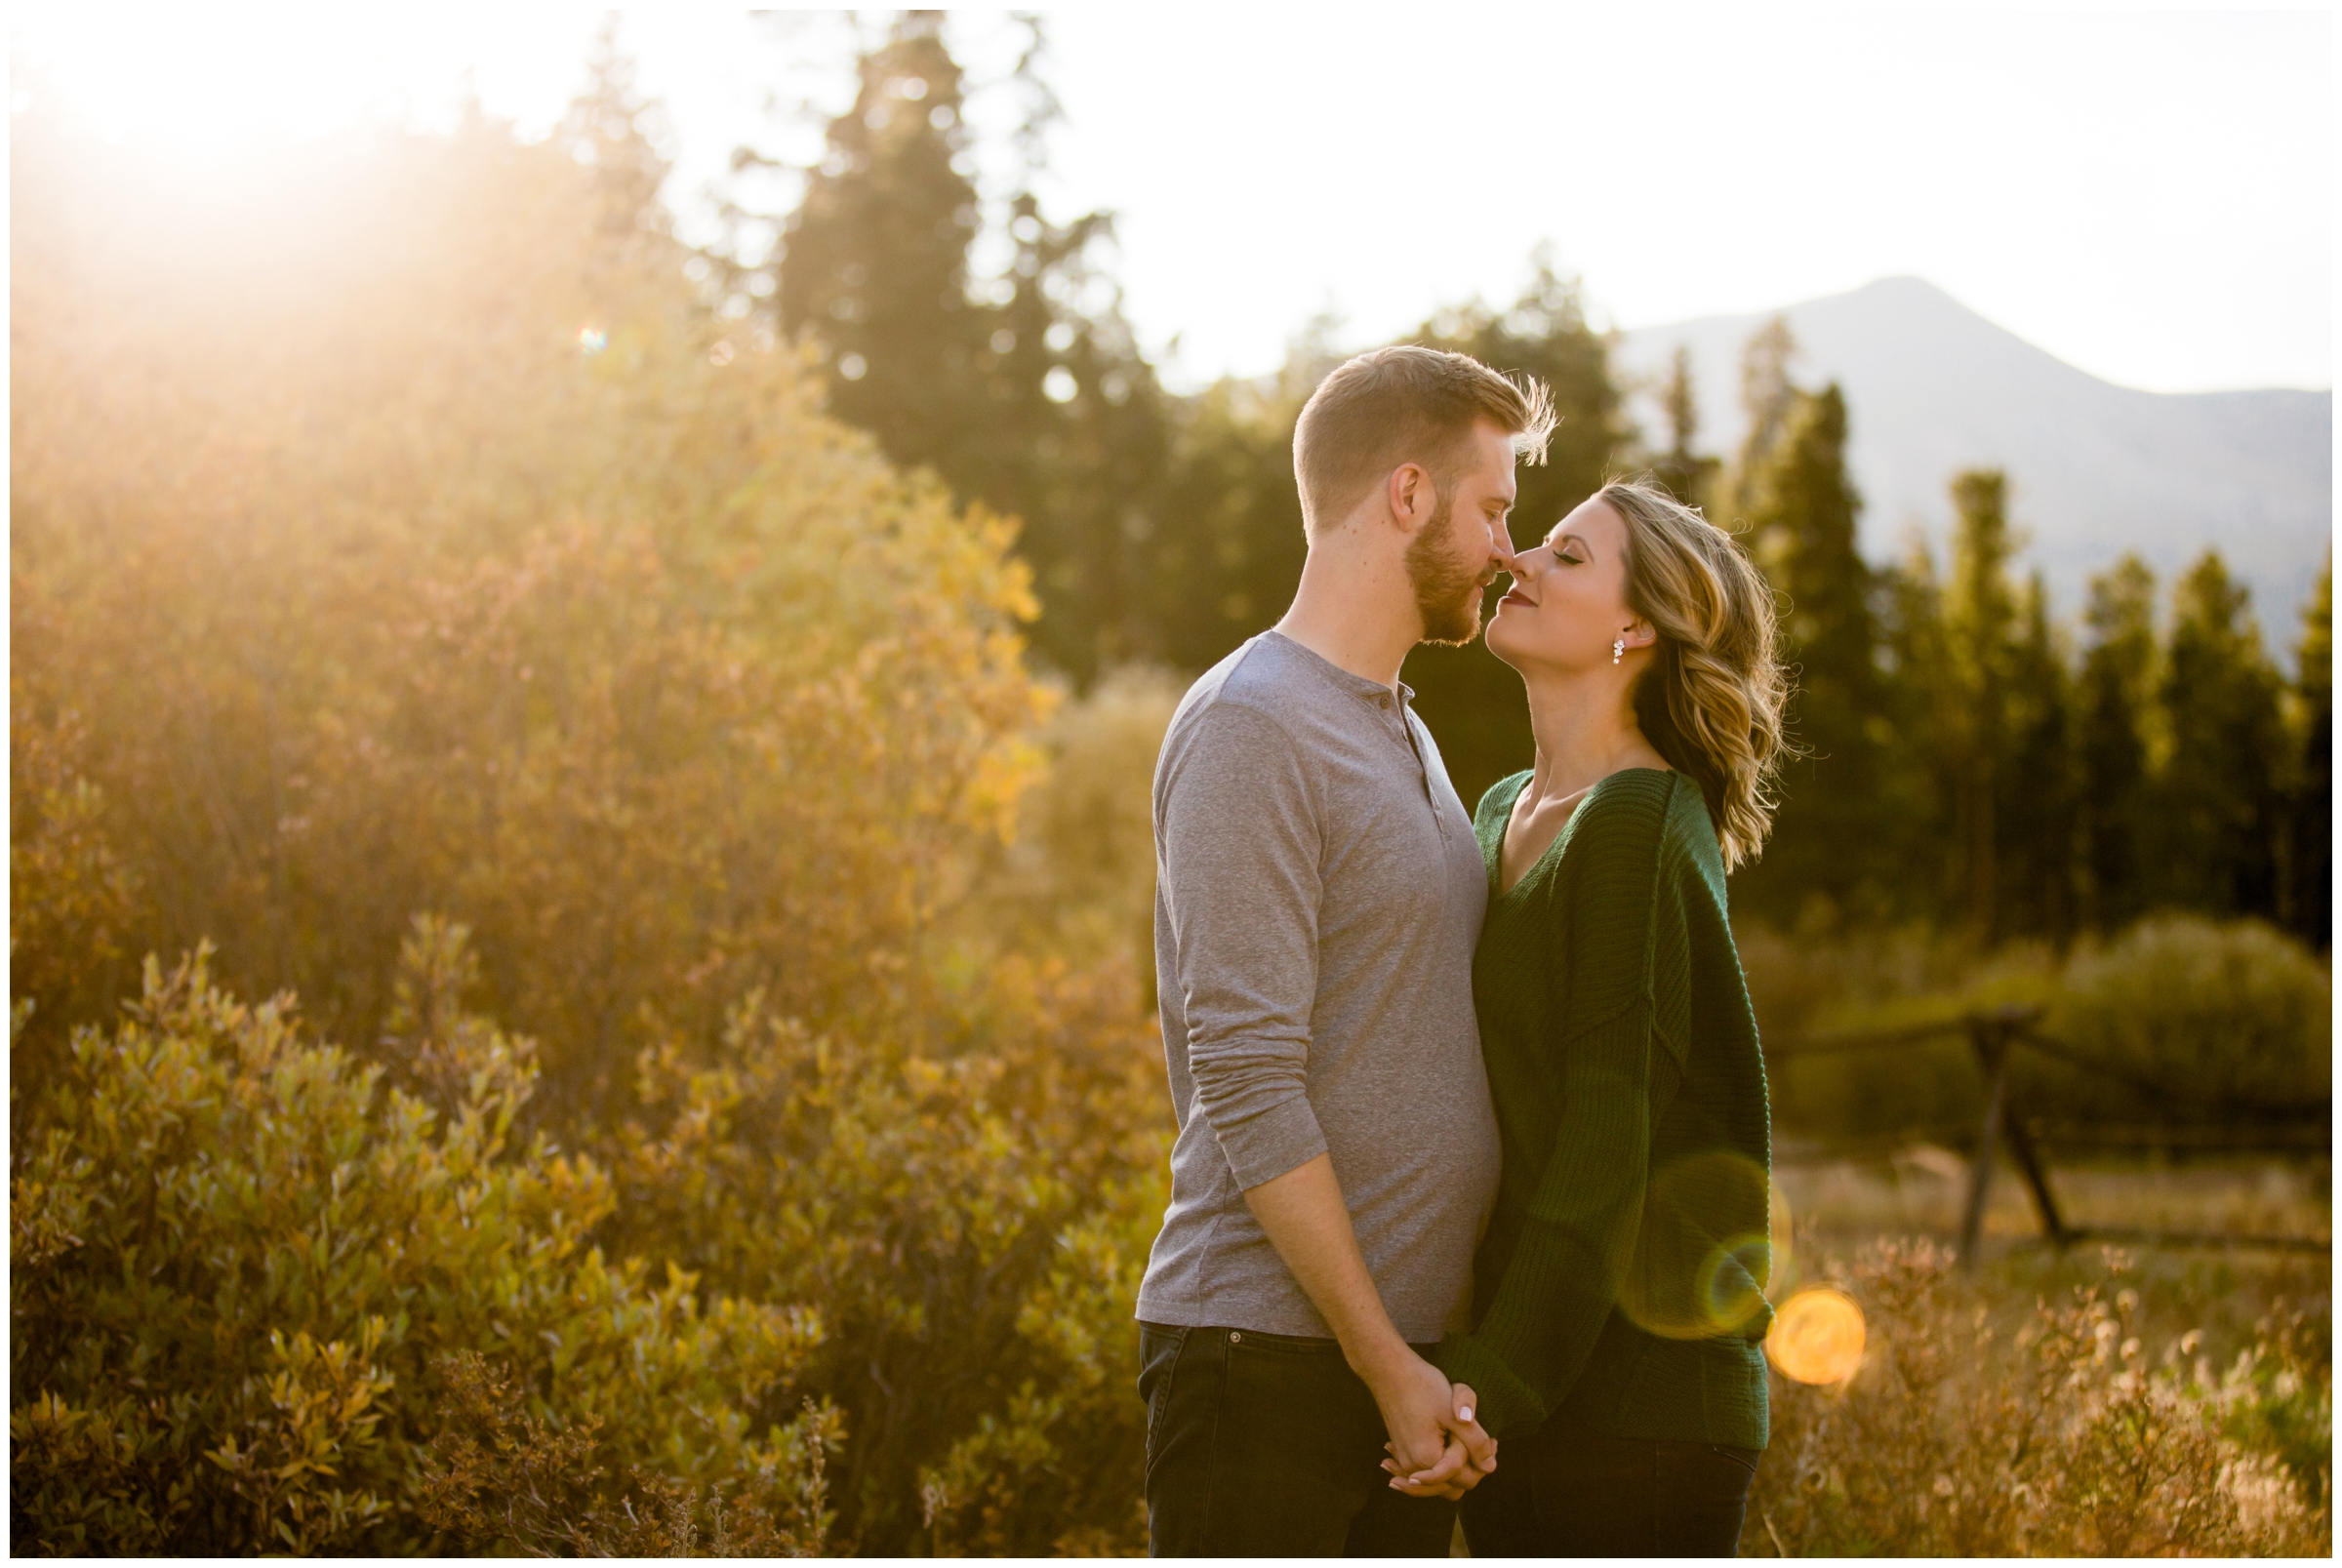 Breckenridge engagement photography session at Sawmill Museum by Colorado mountain photographer Plum Pretty Photographer